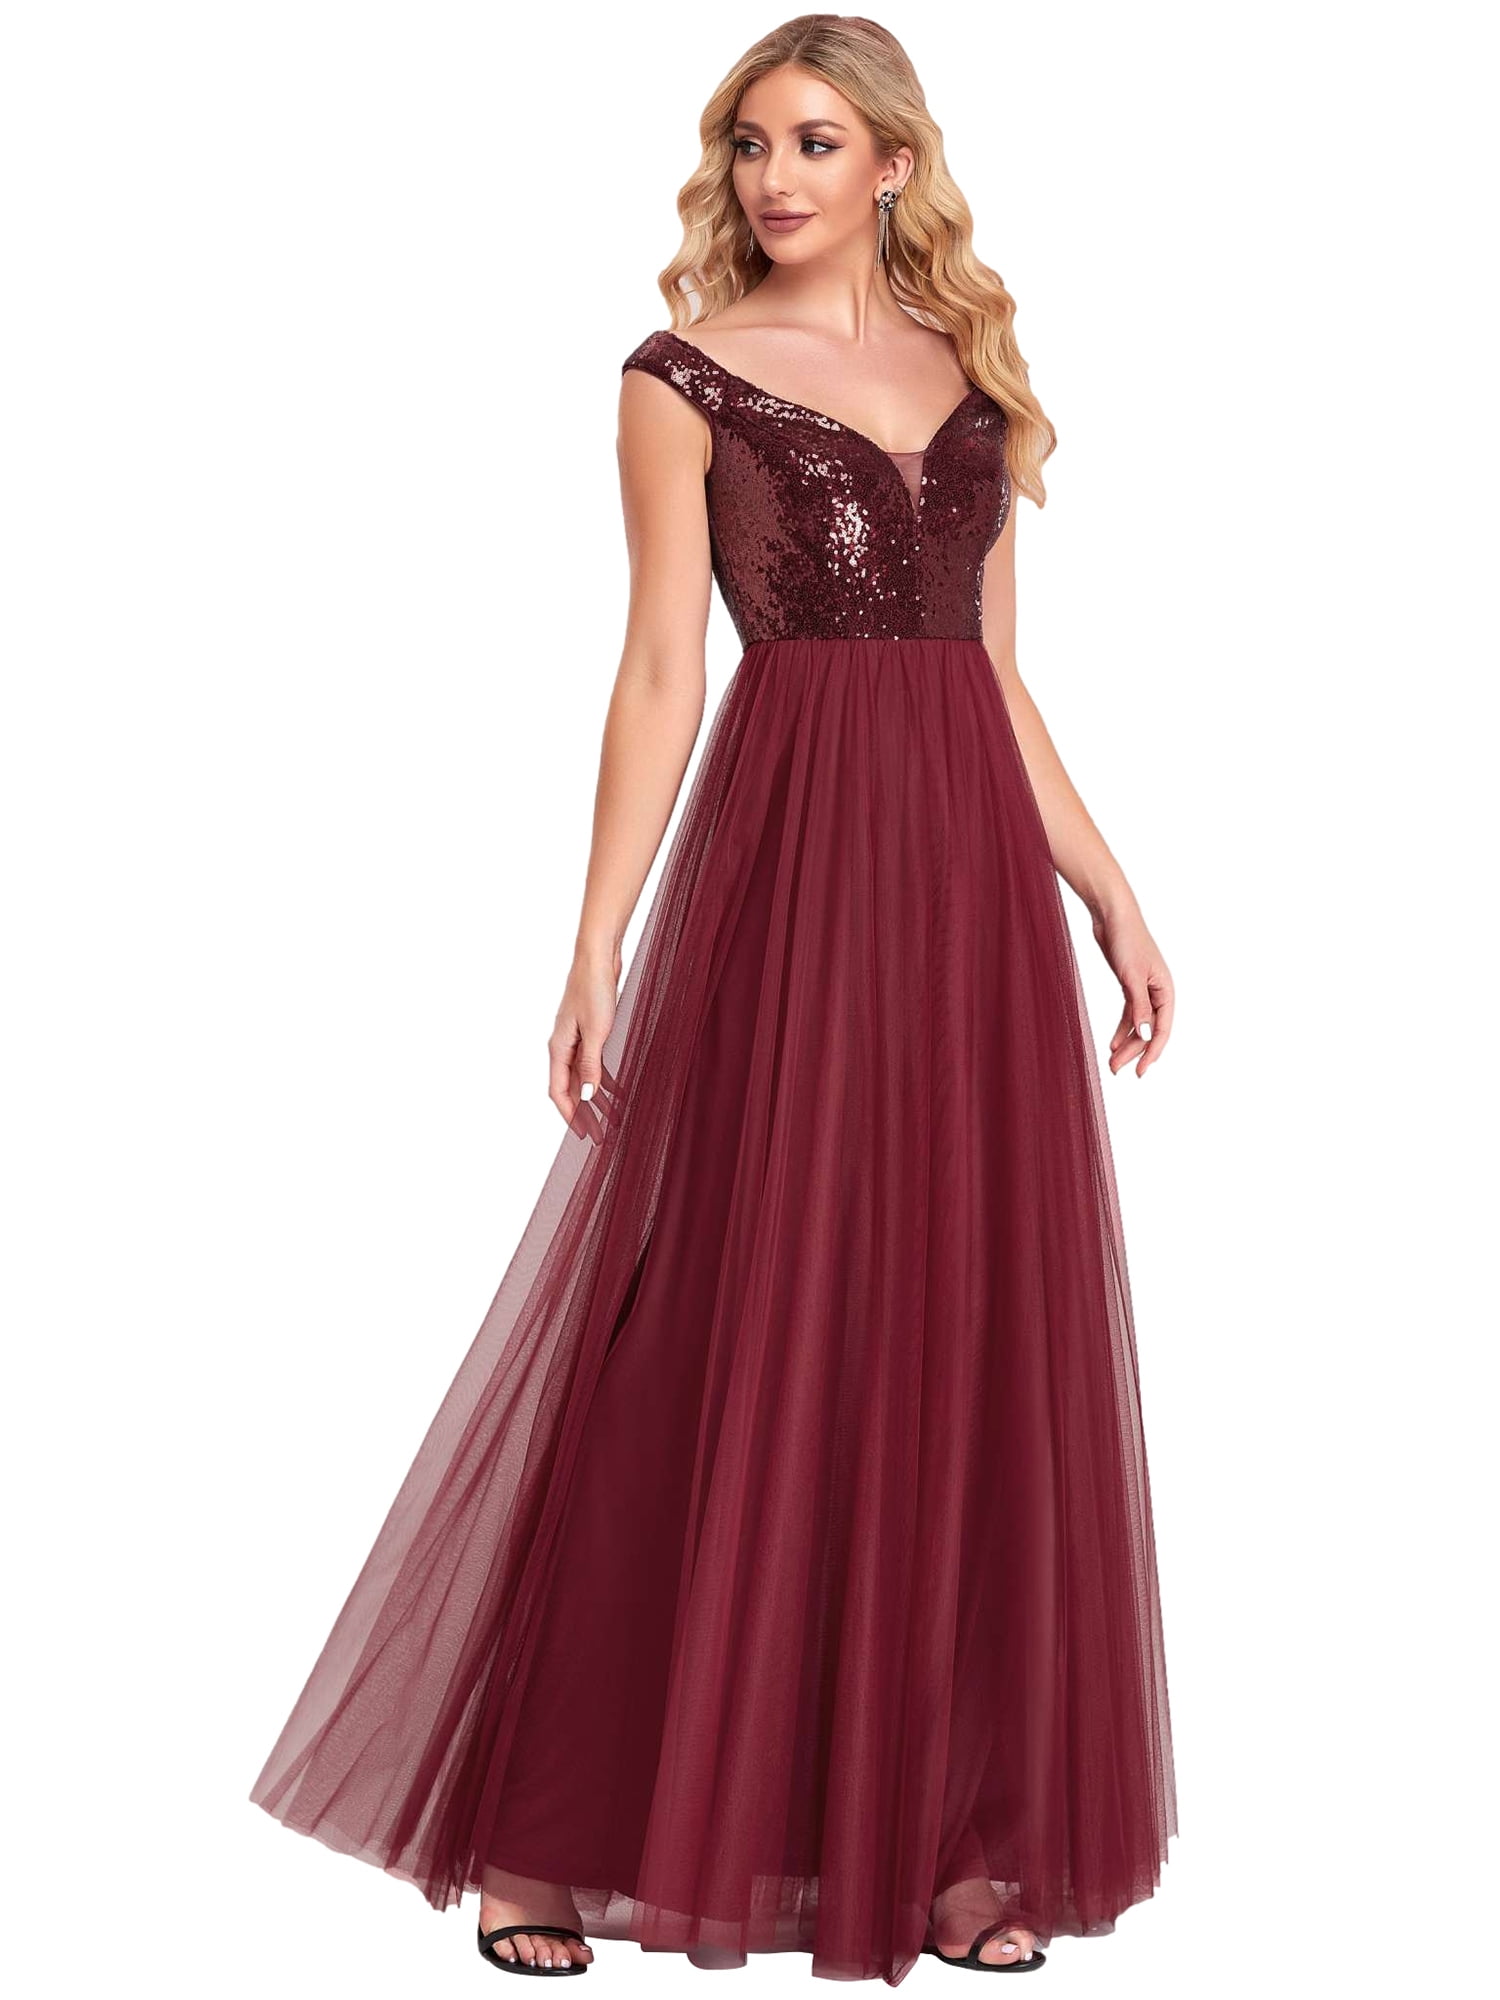 Ever-Pretty US Shoulder-Straps Long Evening Dress Sequins Homecoming Prom Gowns 